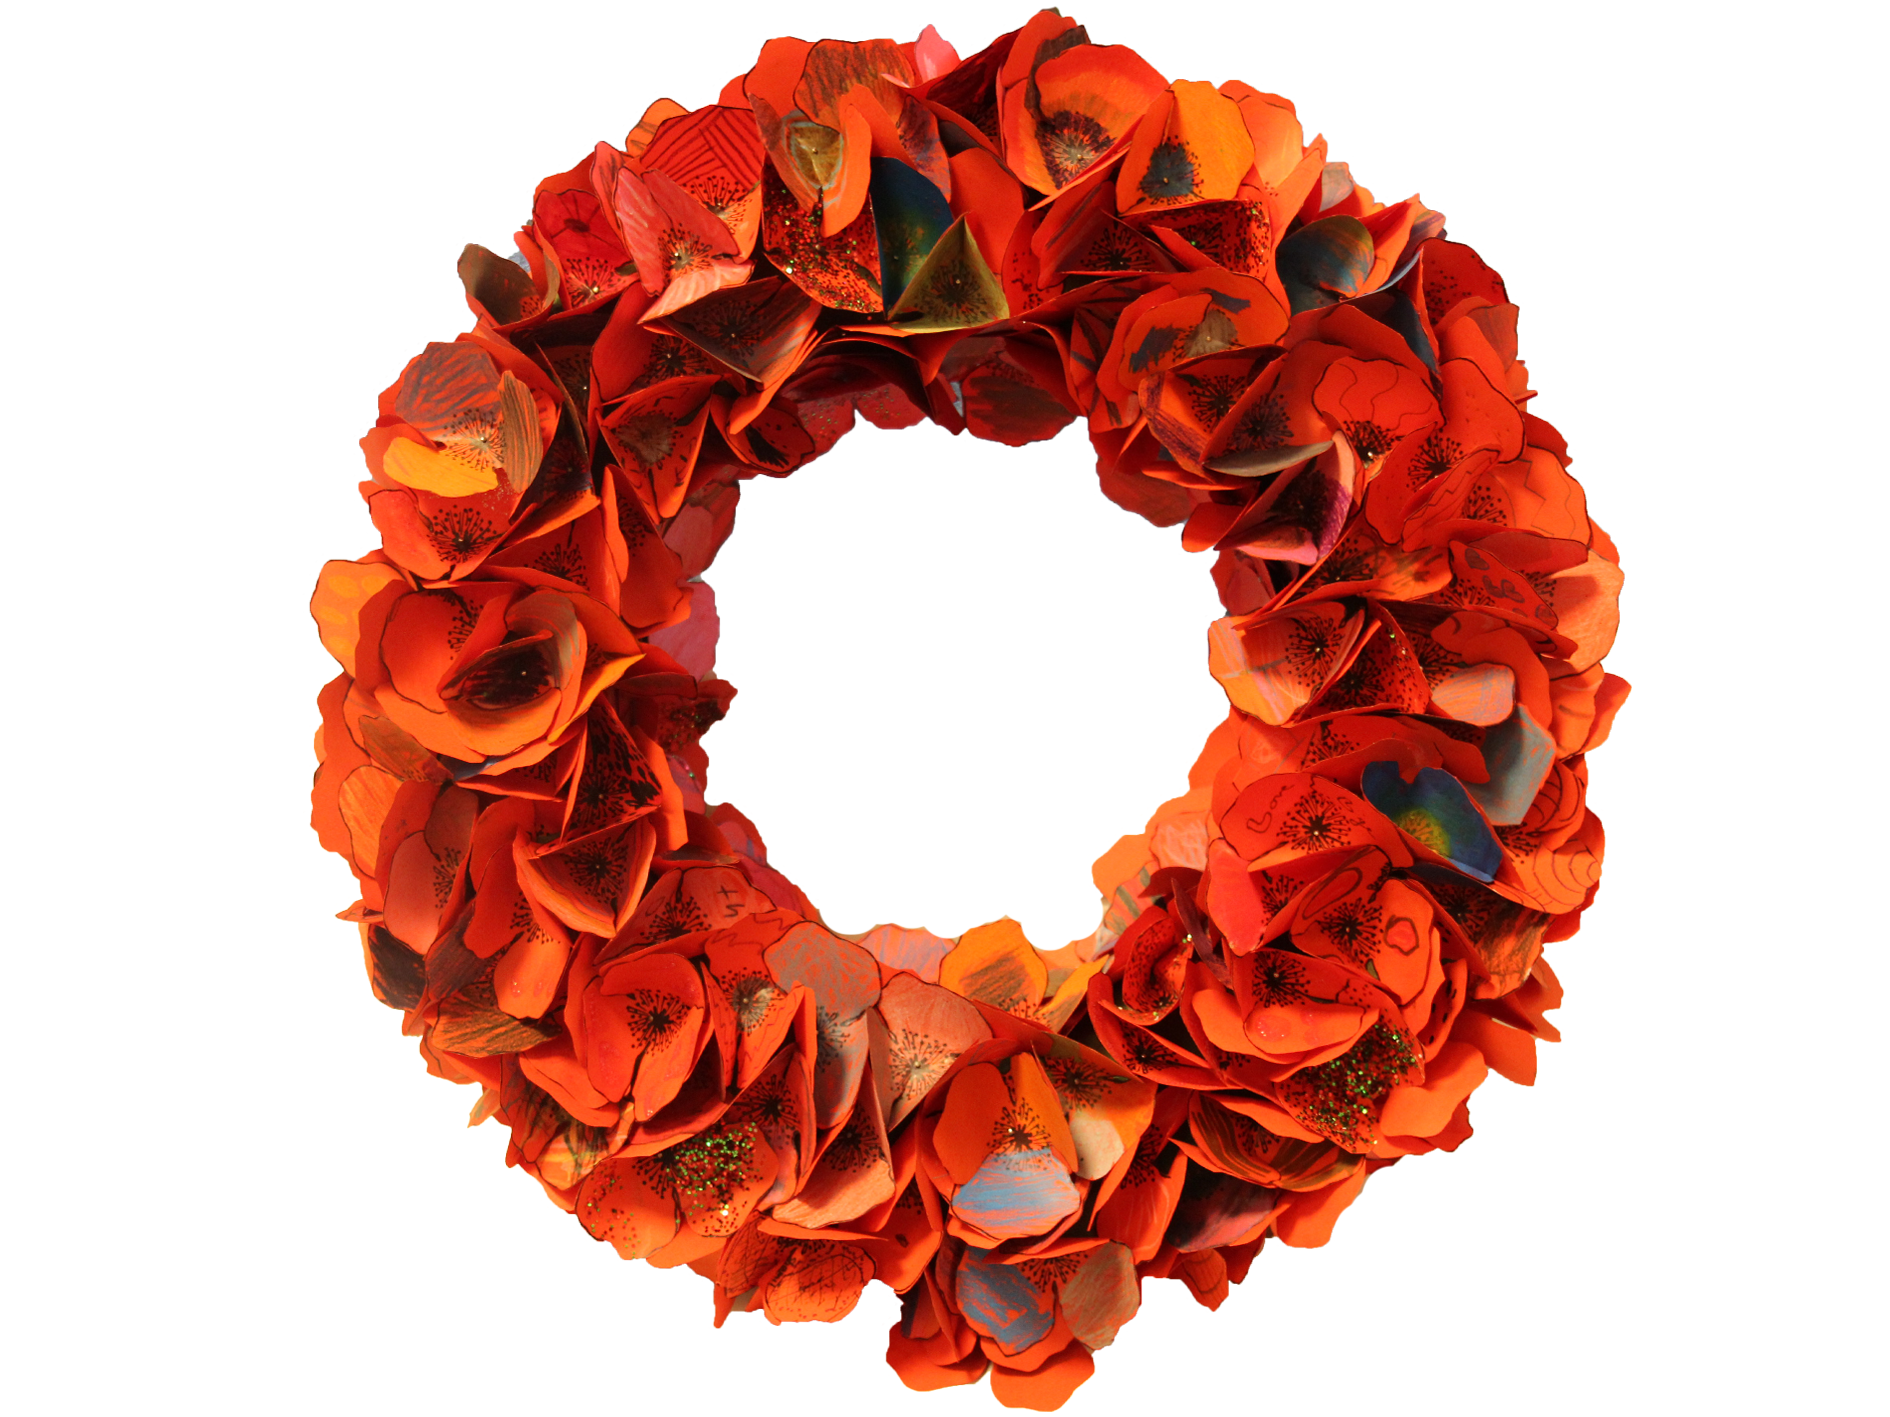 KS poppy wreath, made with poppies decorated by every child in the school.